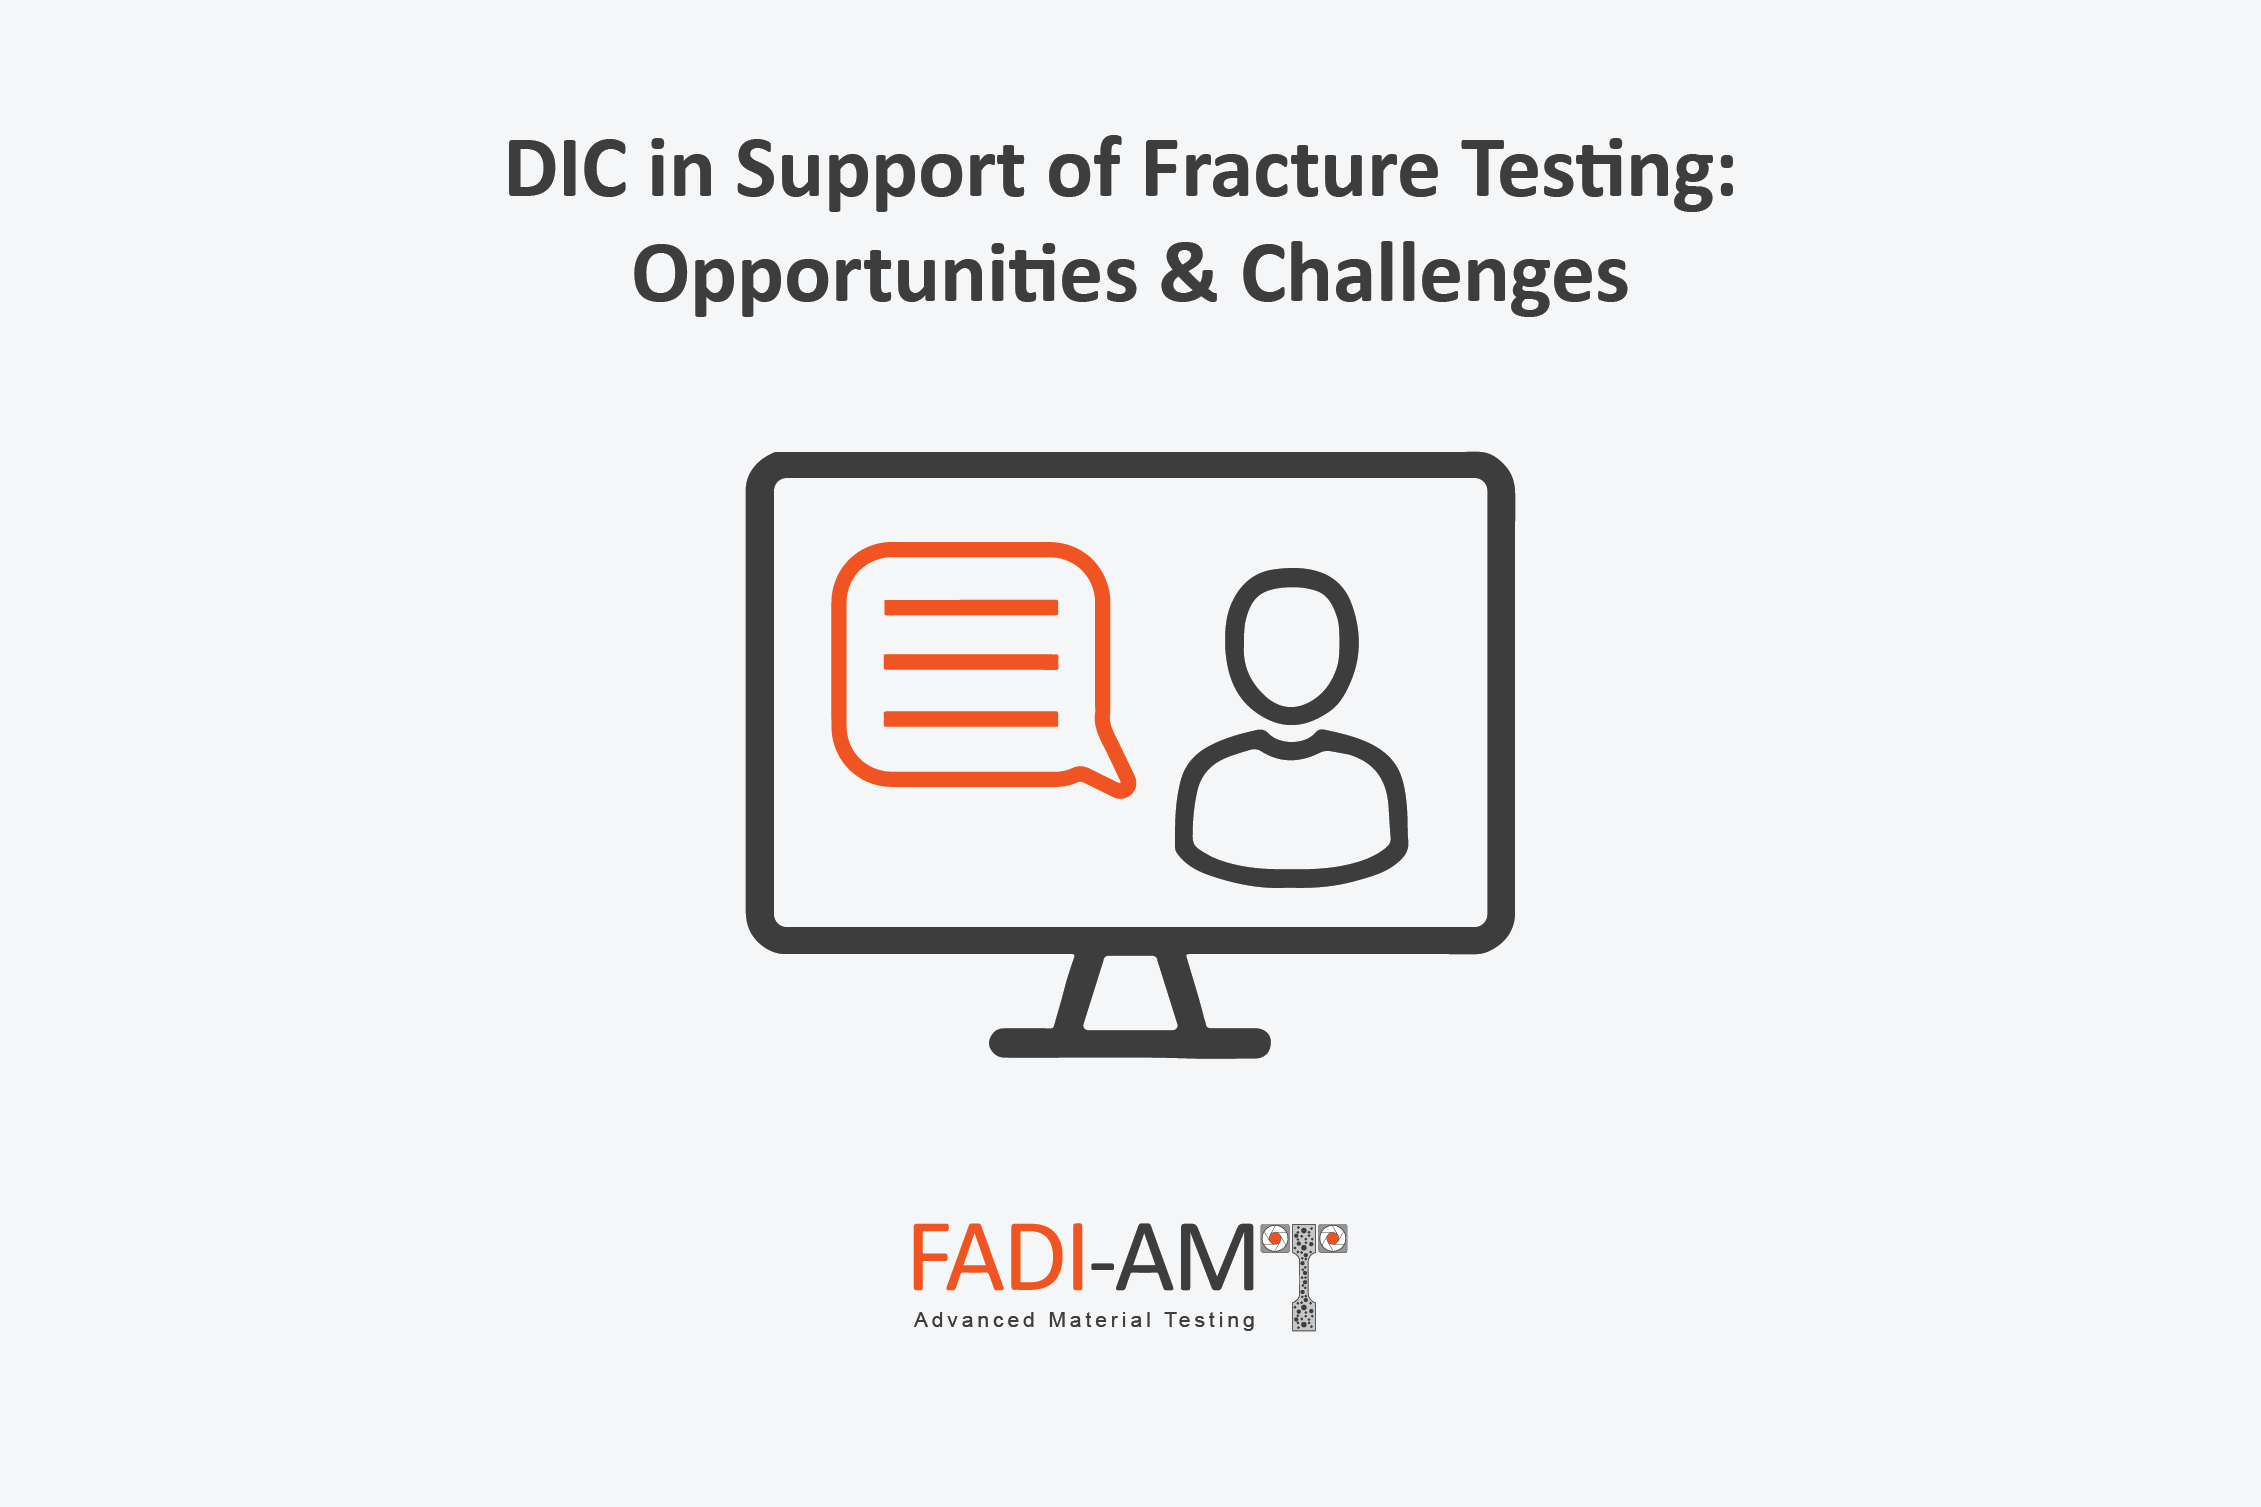 DIC in Support of Fracture Testing-Opportunities & Challenges FADI-AMT